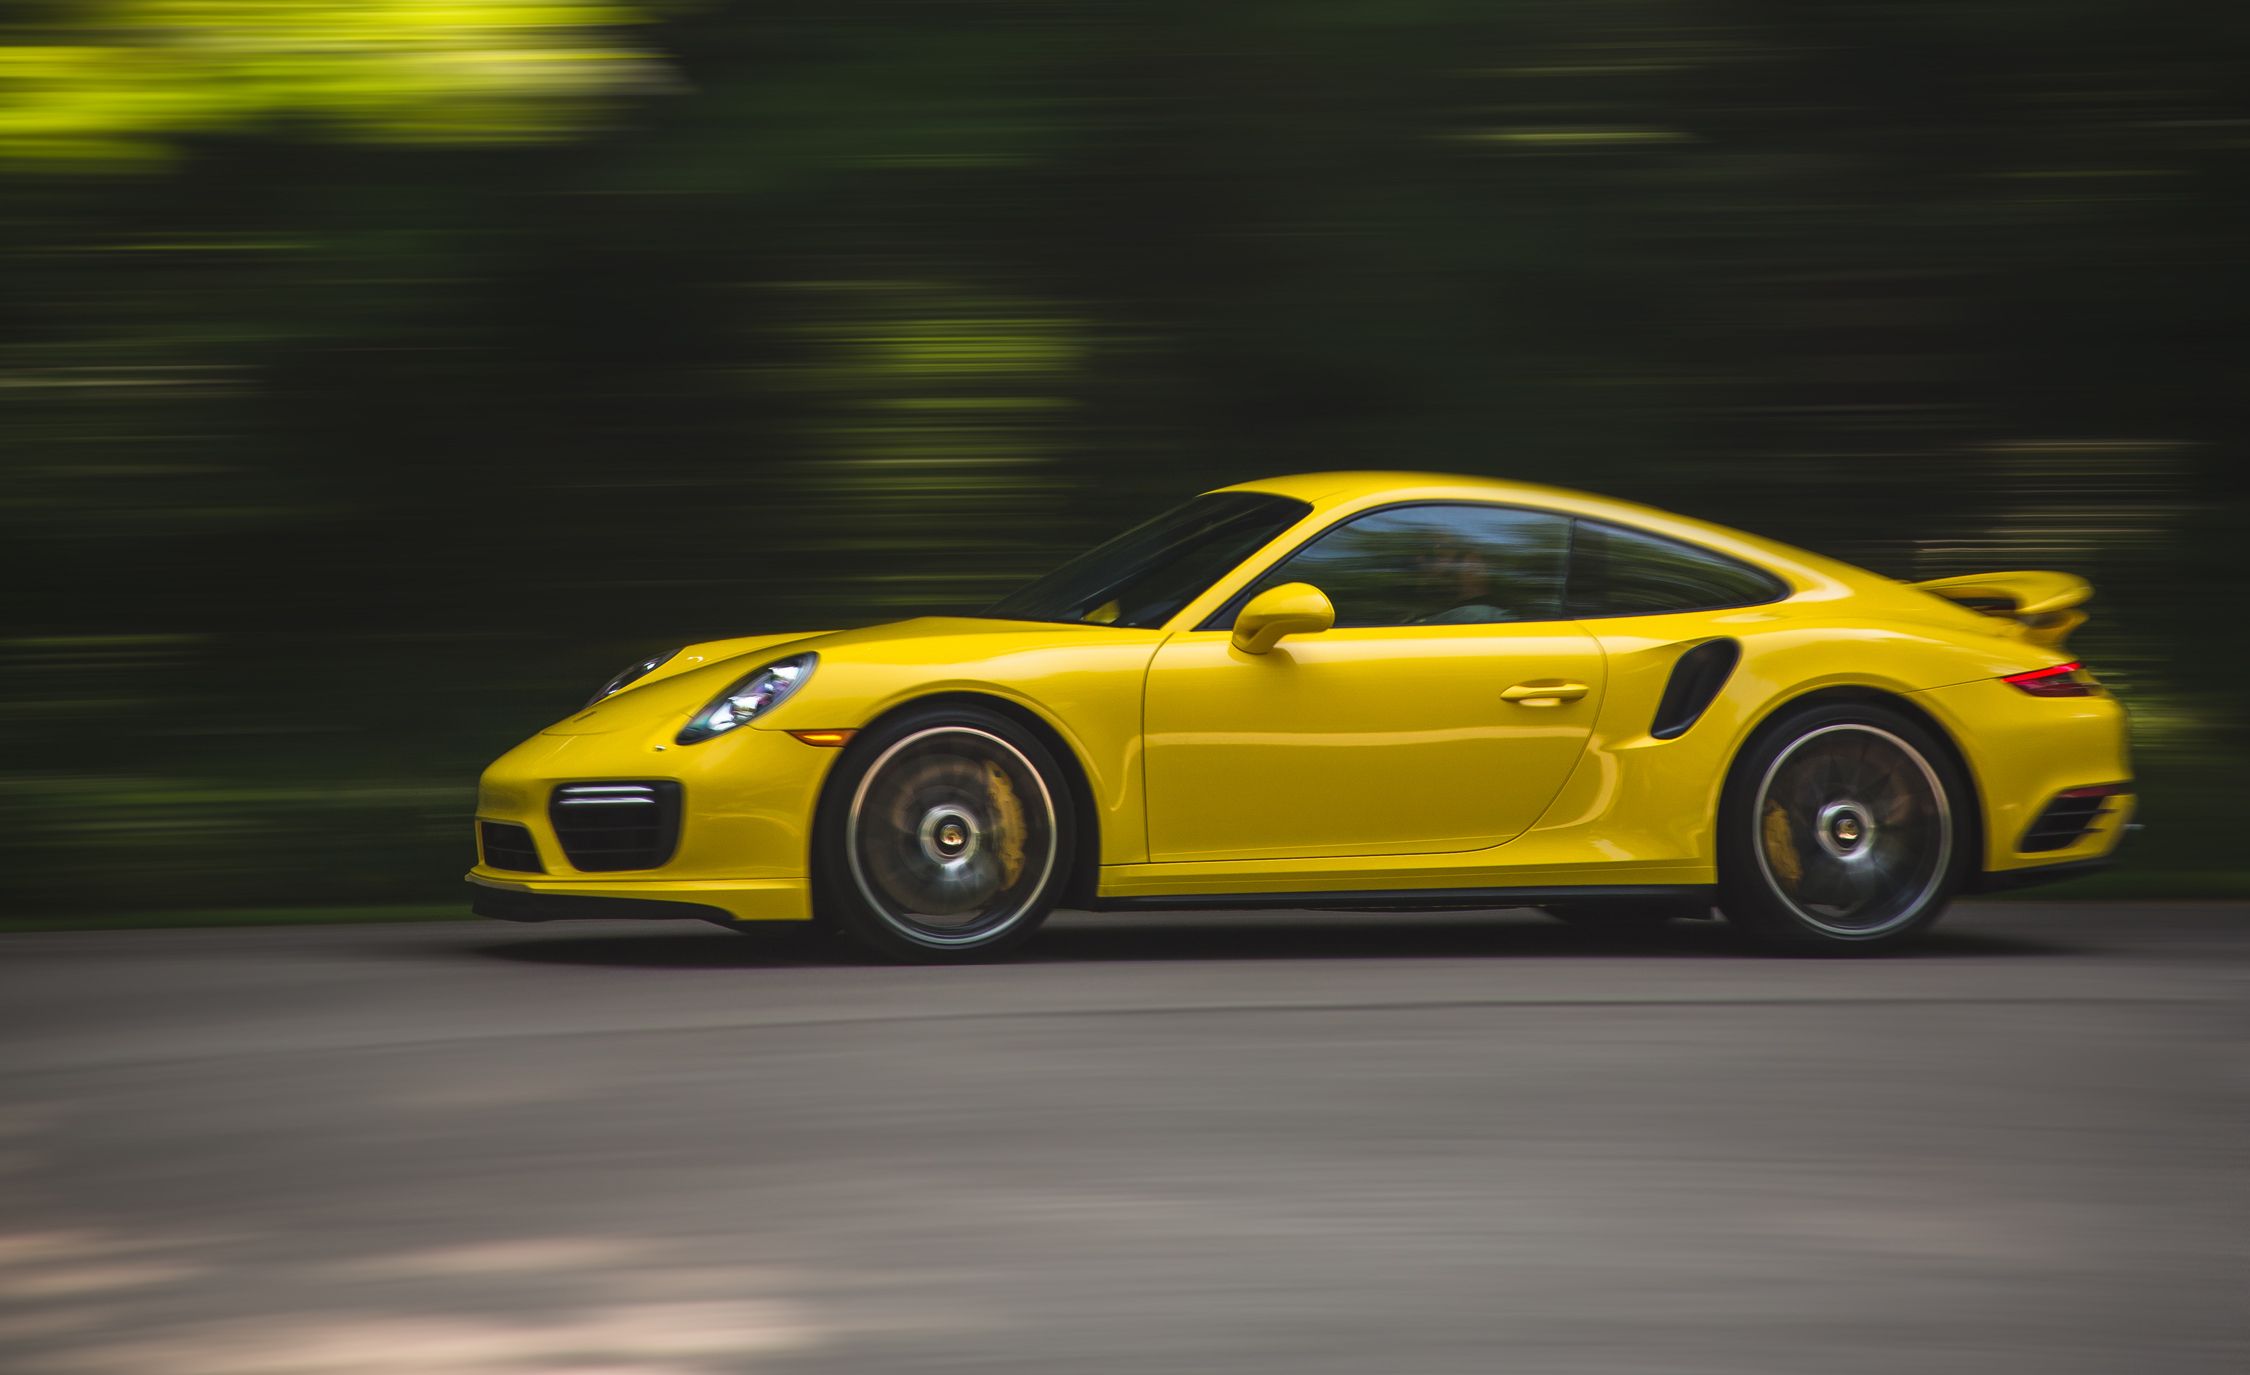 Porsche 911 Turbo S Offers Performance And Personality